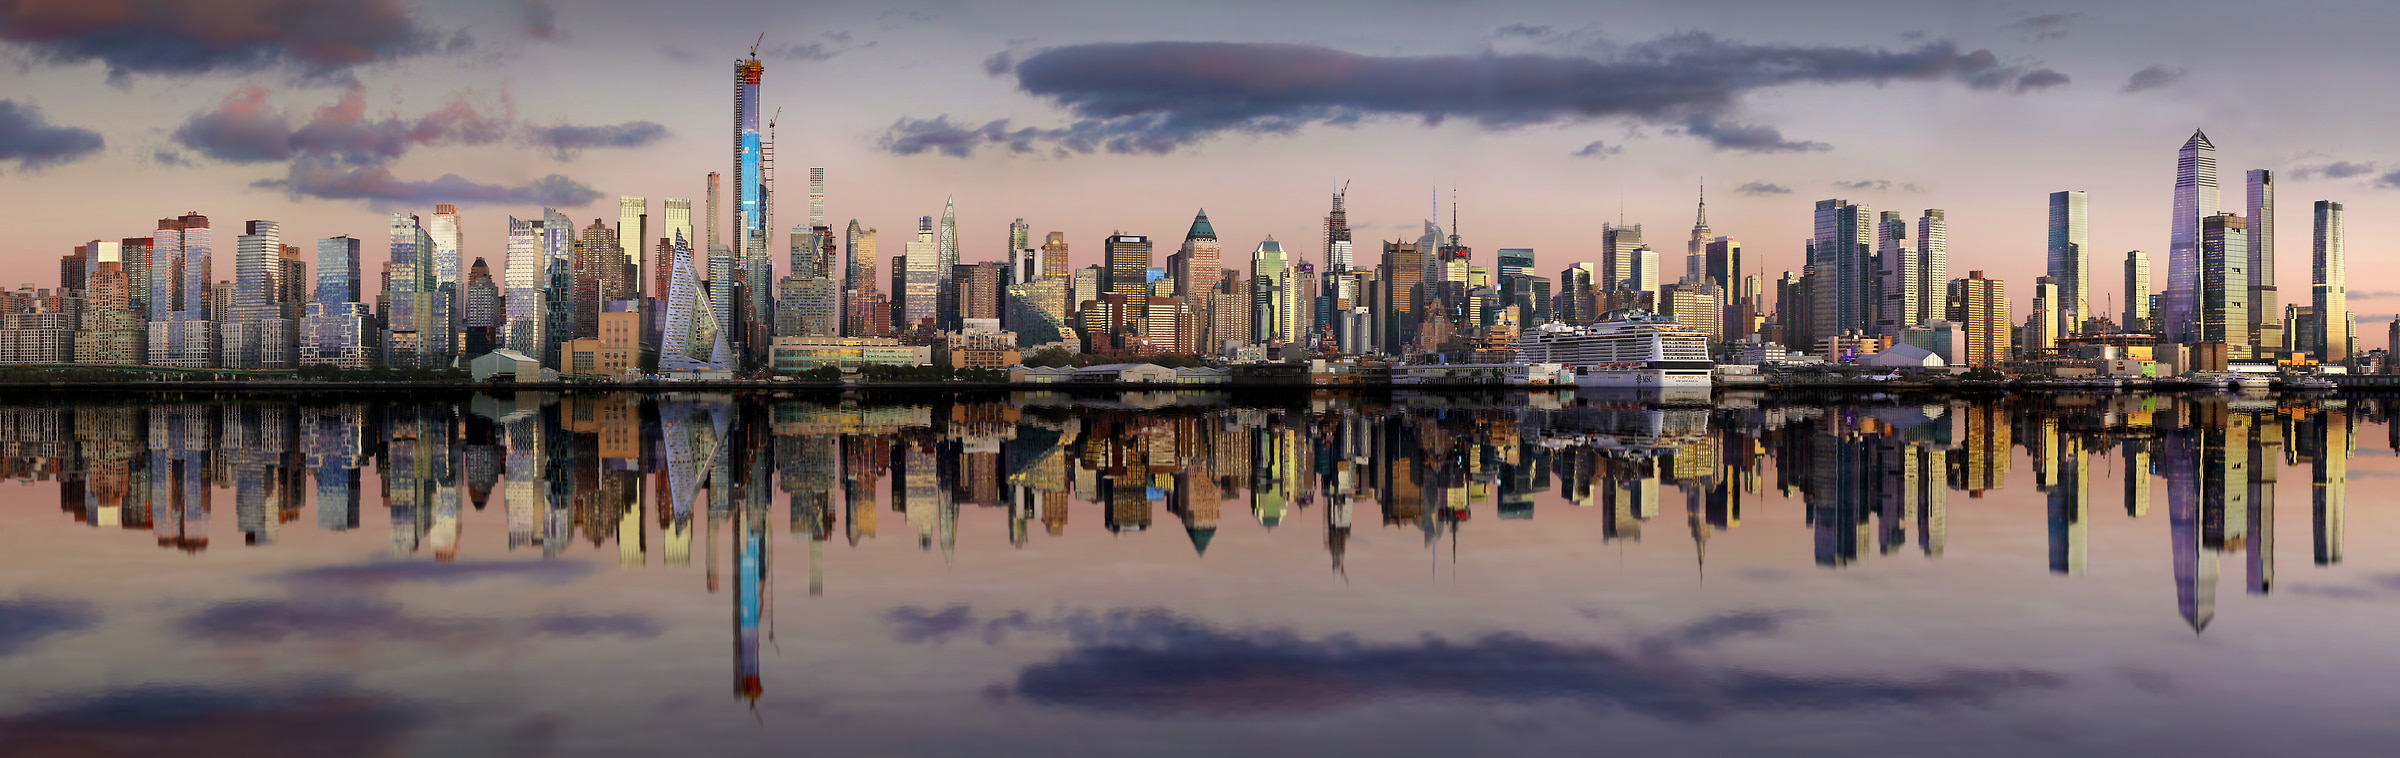 922 megapixels! A very high resolution, large-format VAST photo print of the New York skyline at sunset reflecting in the Hudson River; panorama photograph created by Phil Crawshay in New York, Manhattan